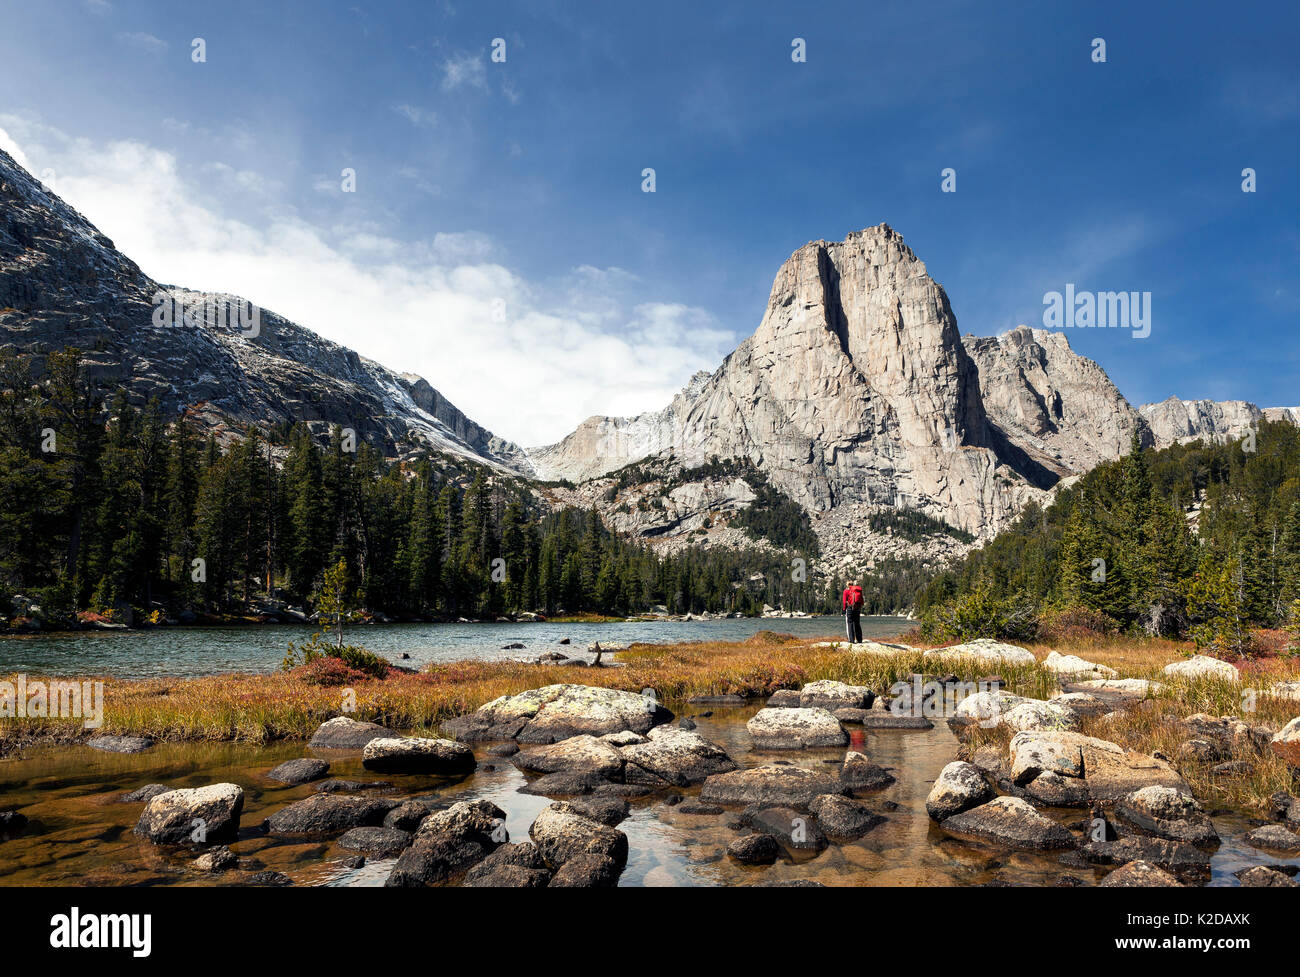 Cathedral Peak from Middle Lake, Popo Agie Wilderness, Wind River Range, Shoshone National Forest, Wyoming, USA. September 2015. Model released. Stock Photo